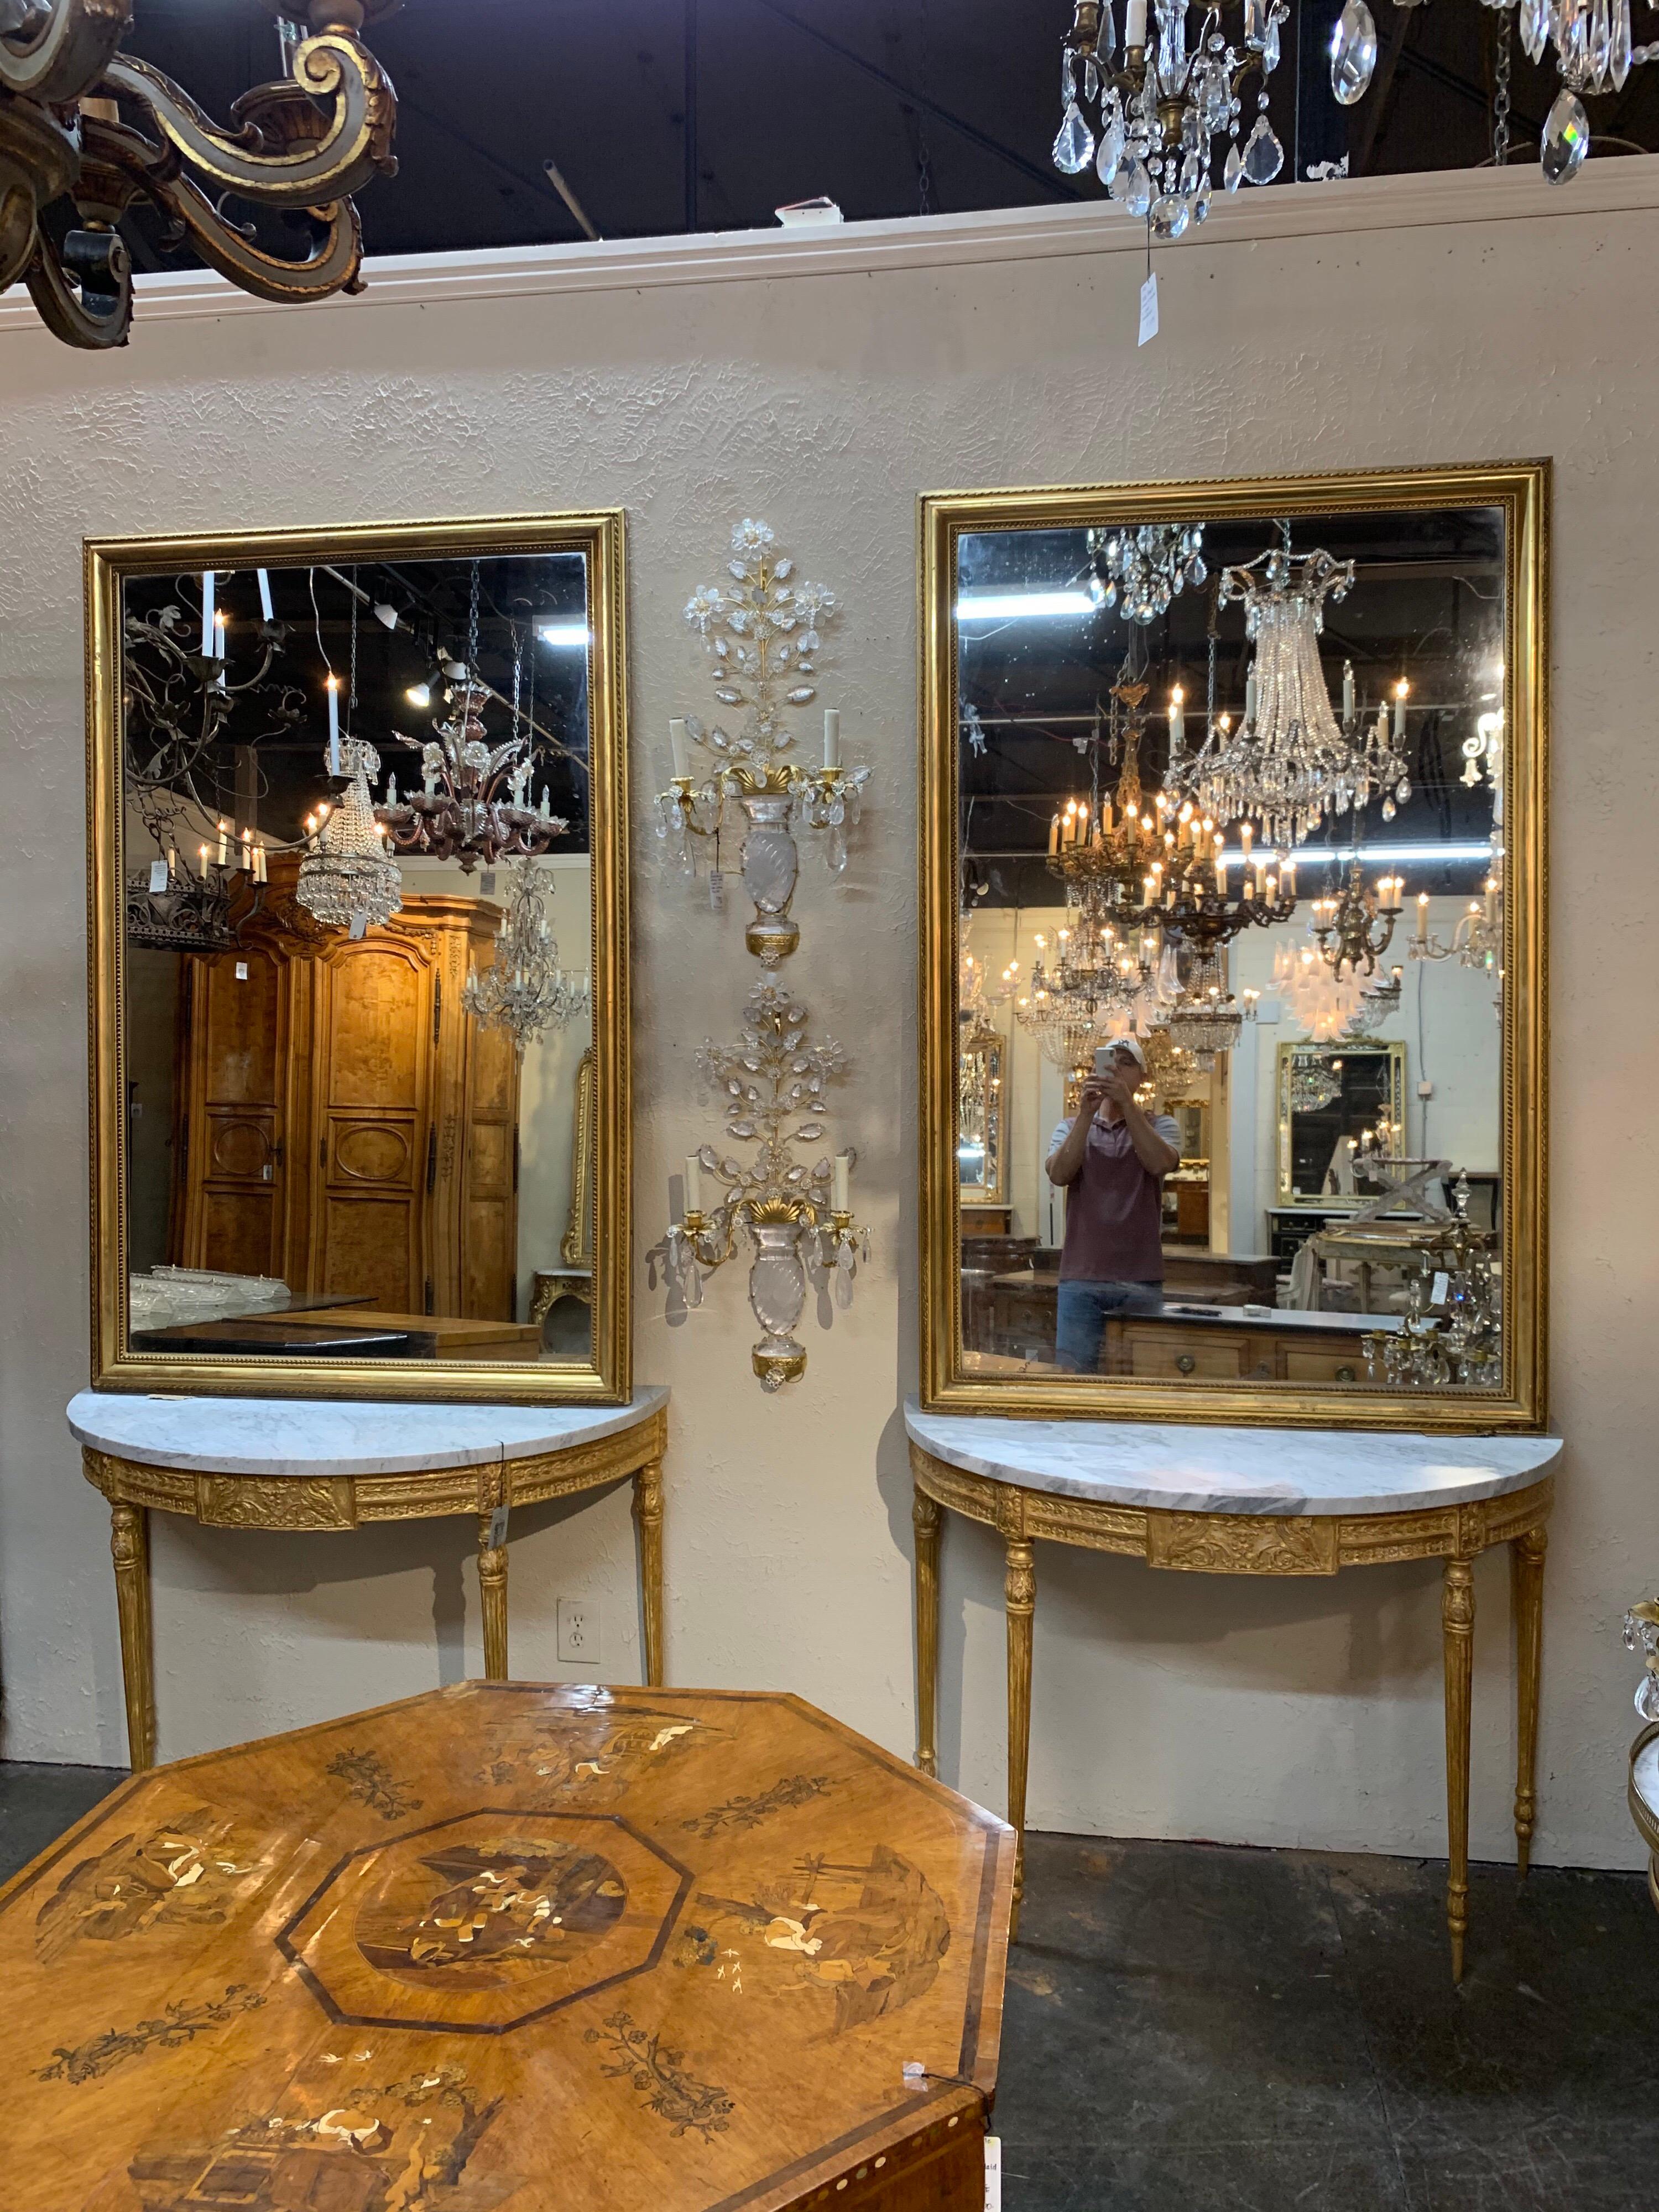 Very fine large pair of 19th century French Directoire style giltwood mirrors. Beautiful gilt on these along with pretty details on the borders. A great pair that would make a stunning statement!